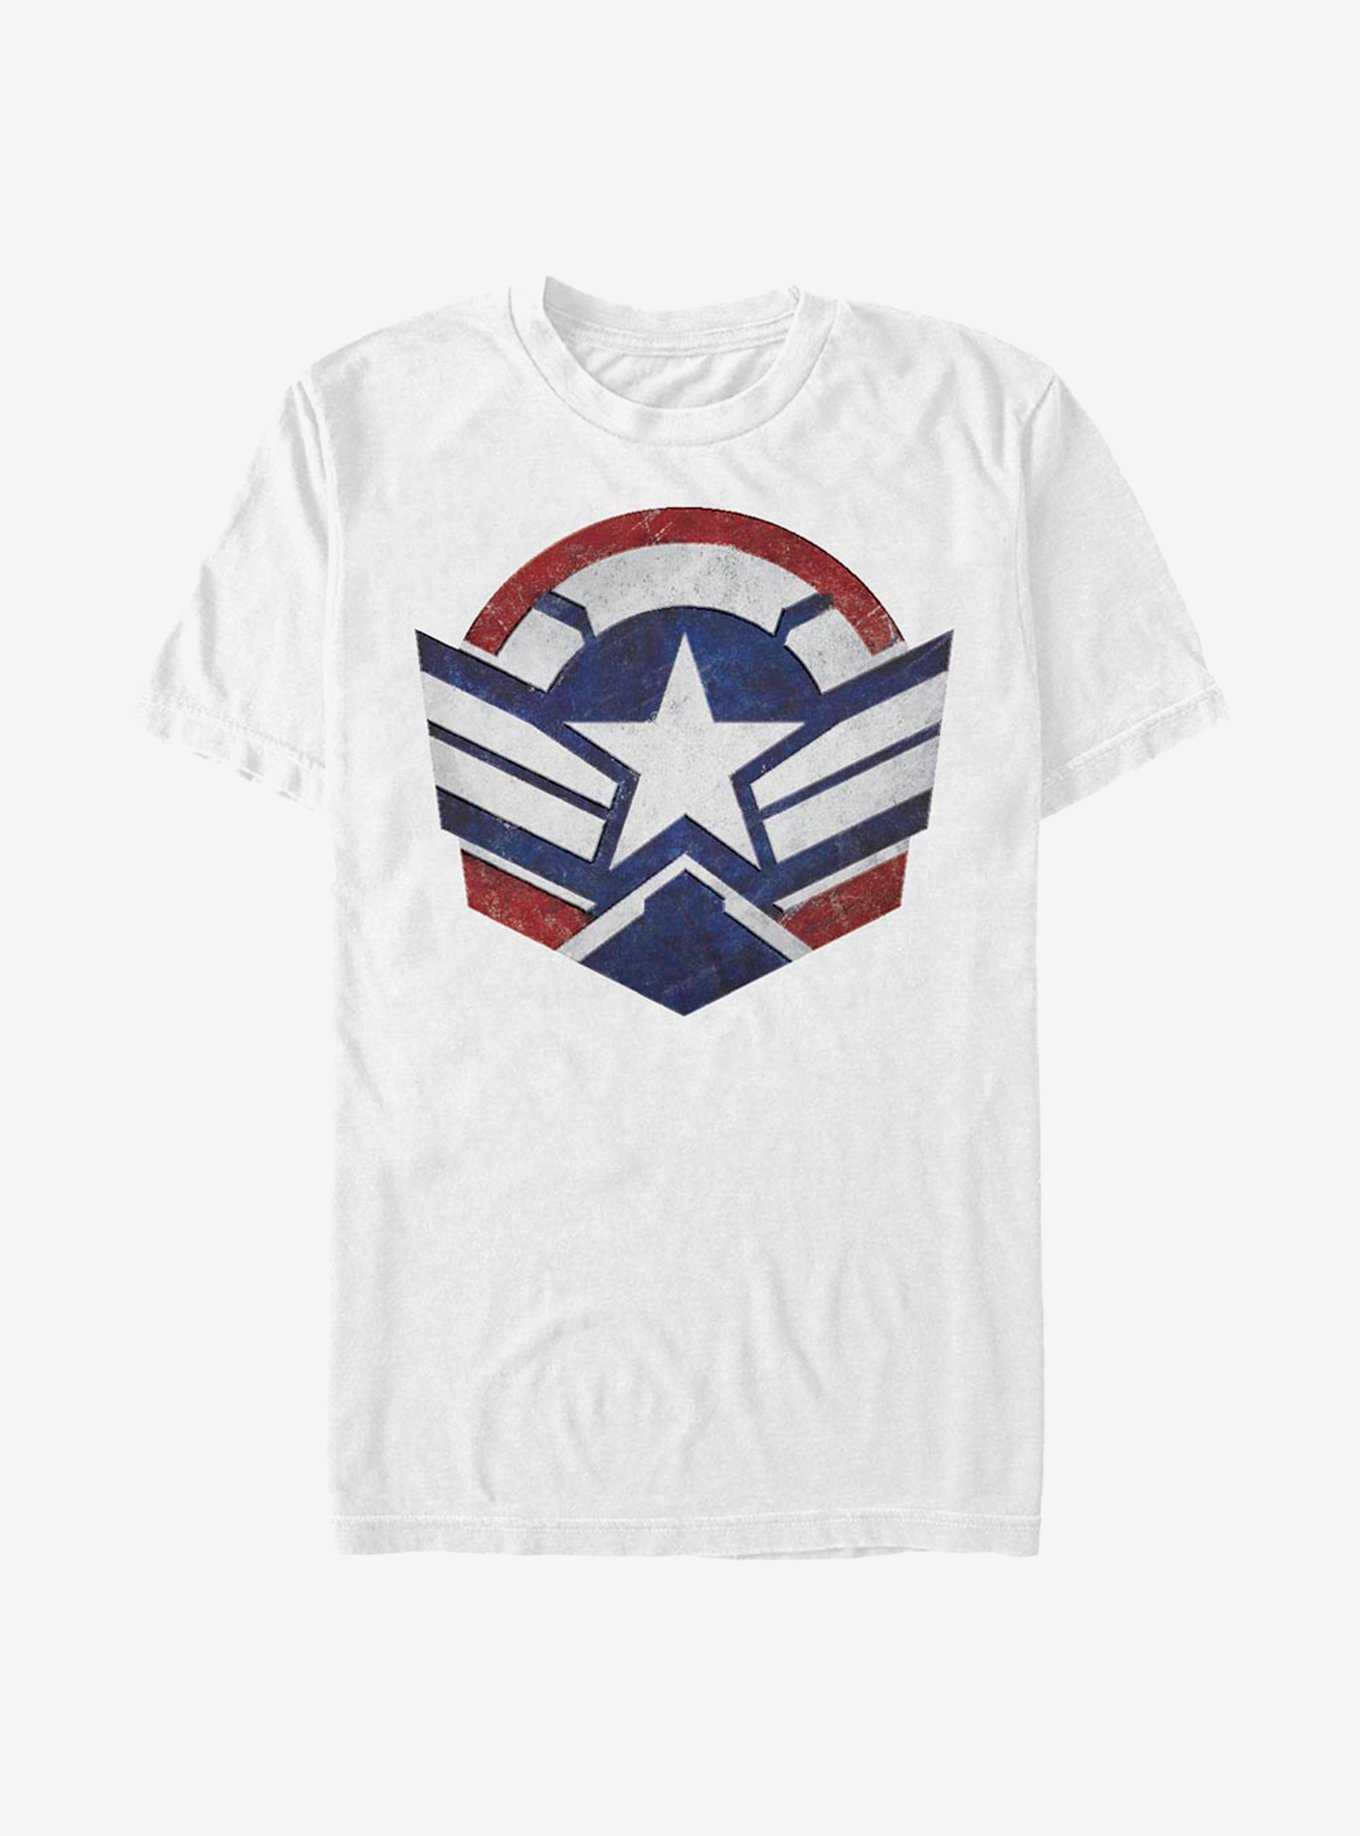 Marvel The Falcon And The Winter Soldier Logo T-Shirt, , hi-res